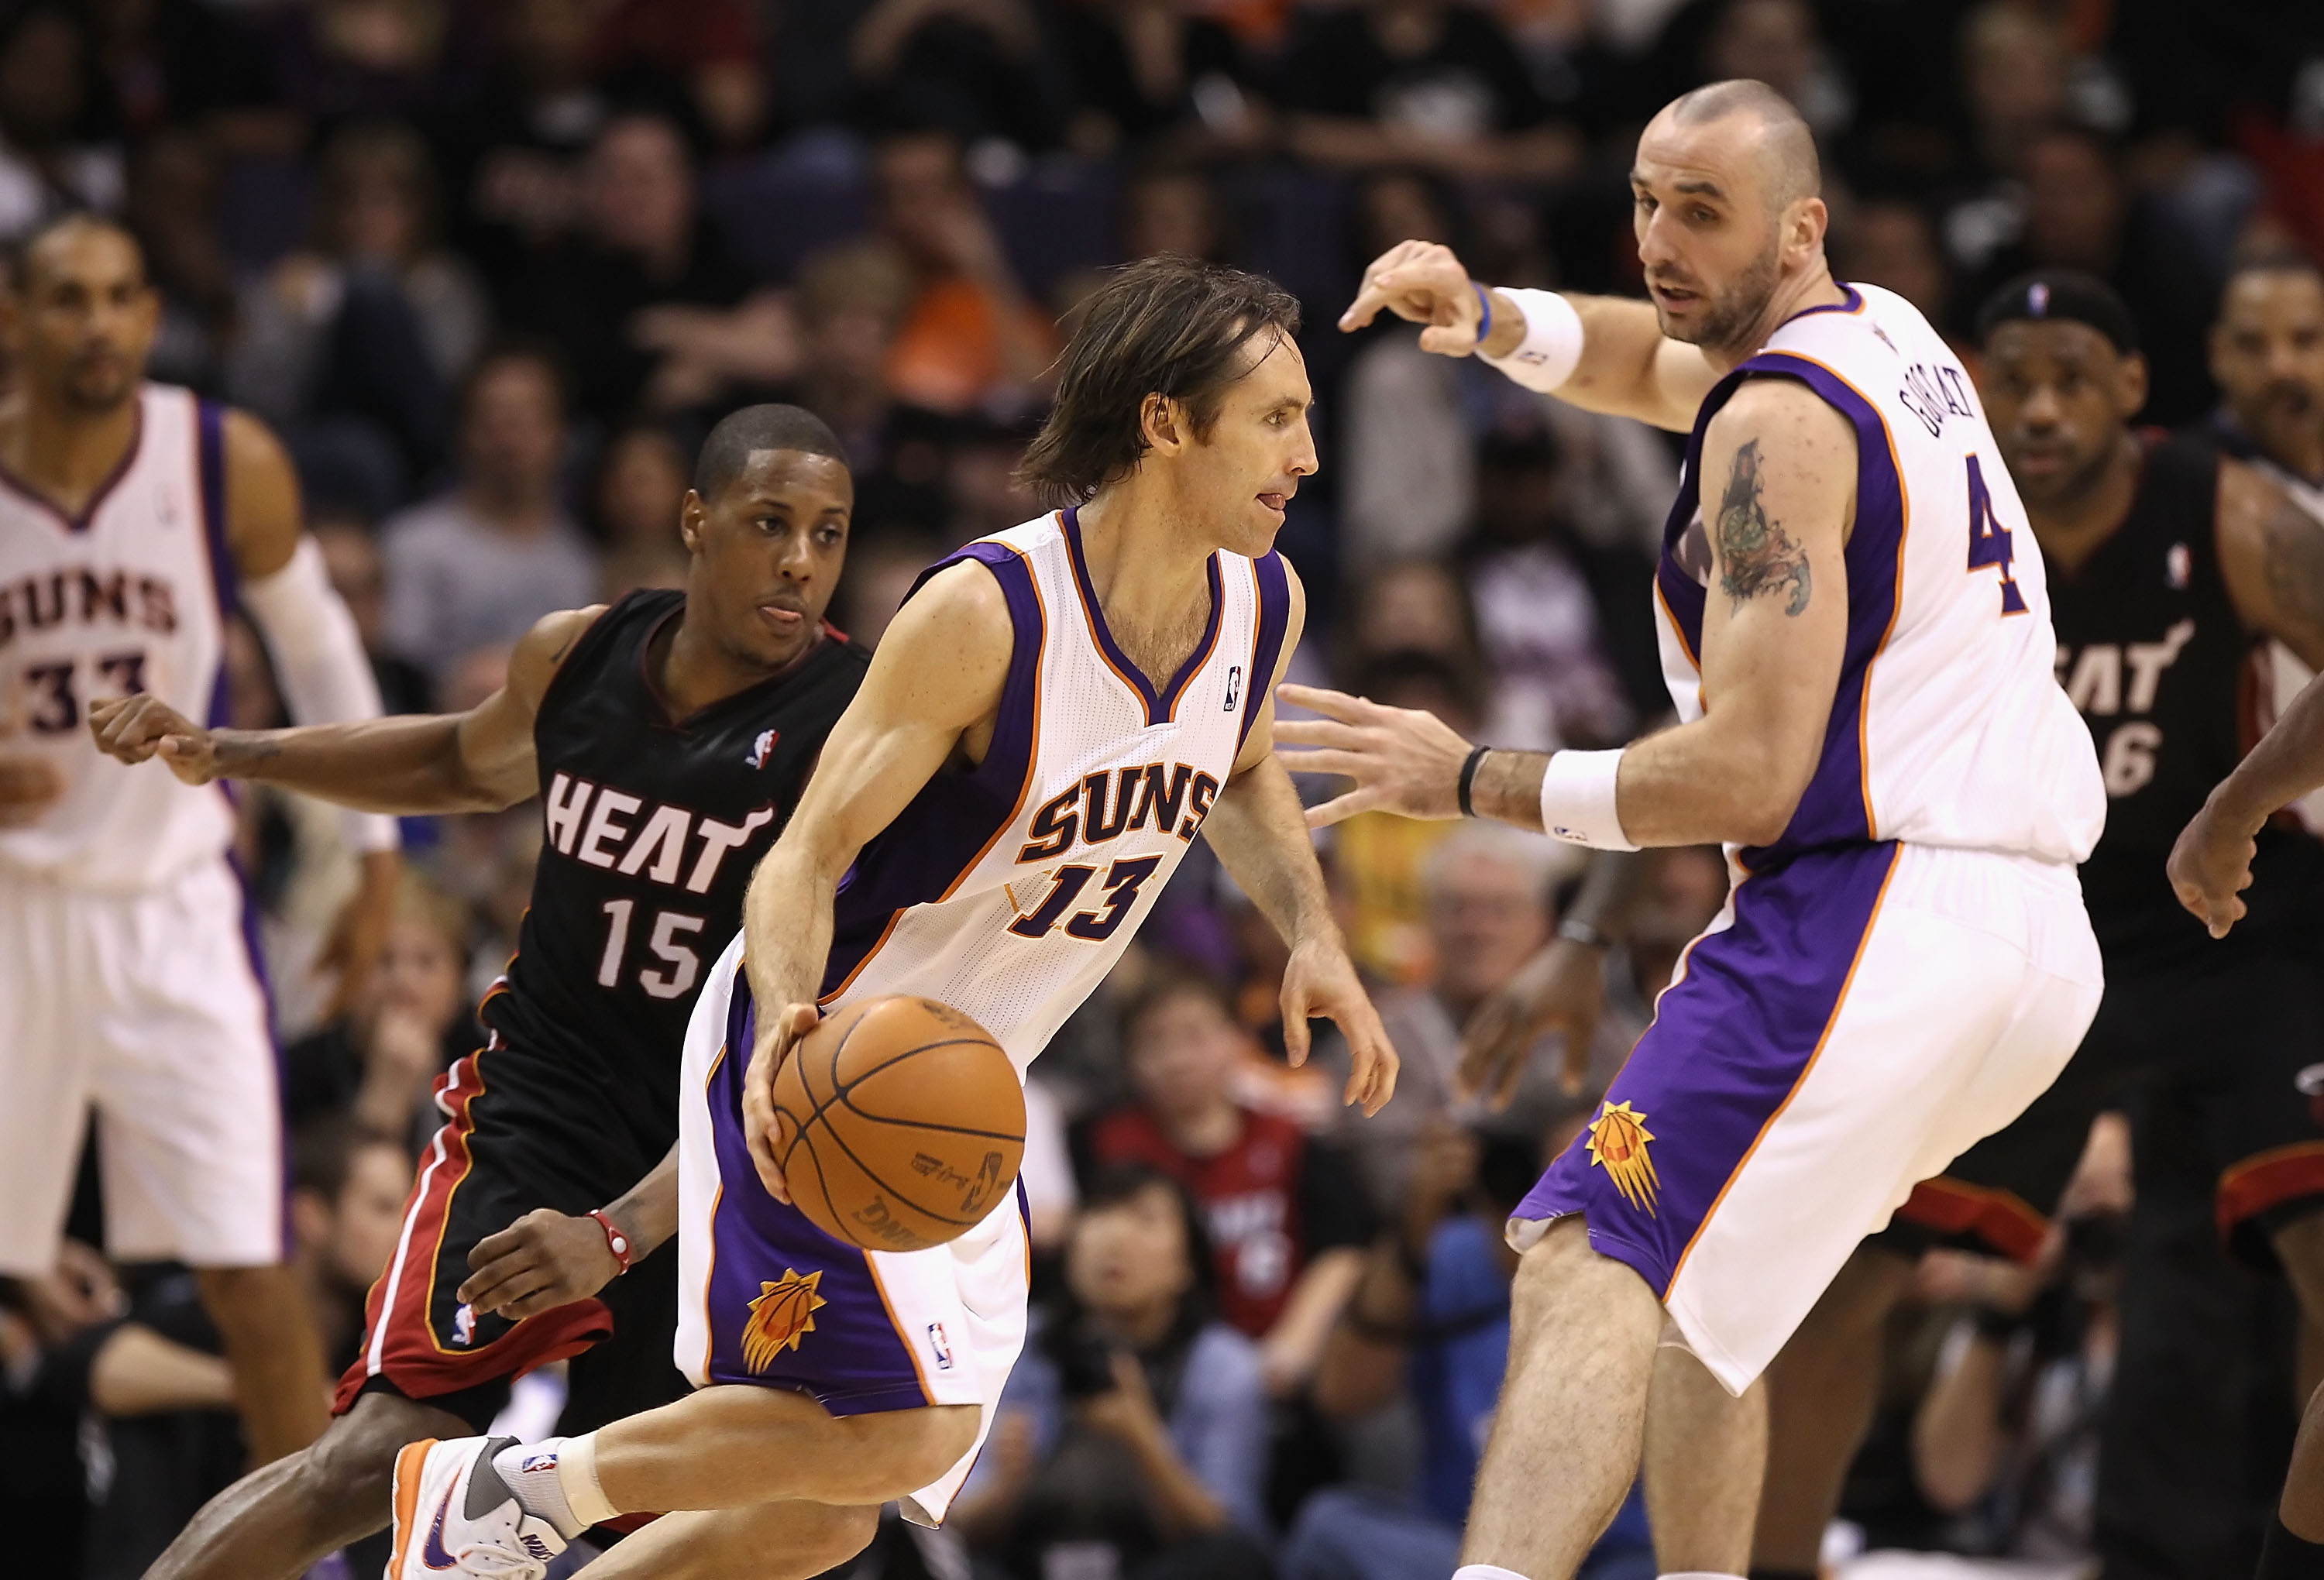 PHOENIX - DECEMBER 23:  Steve Nash #13 of the Phoenix Suns drives the ball against the Miami Heat during the NBA game at US Airways Center on December 23, 2010 in Phoenix, Arizona. The Heat defeated the Suns 95-83. NOTE TO USER: User expressly acknowledge